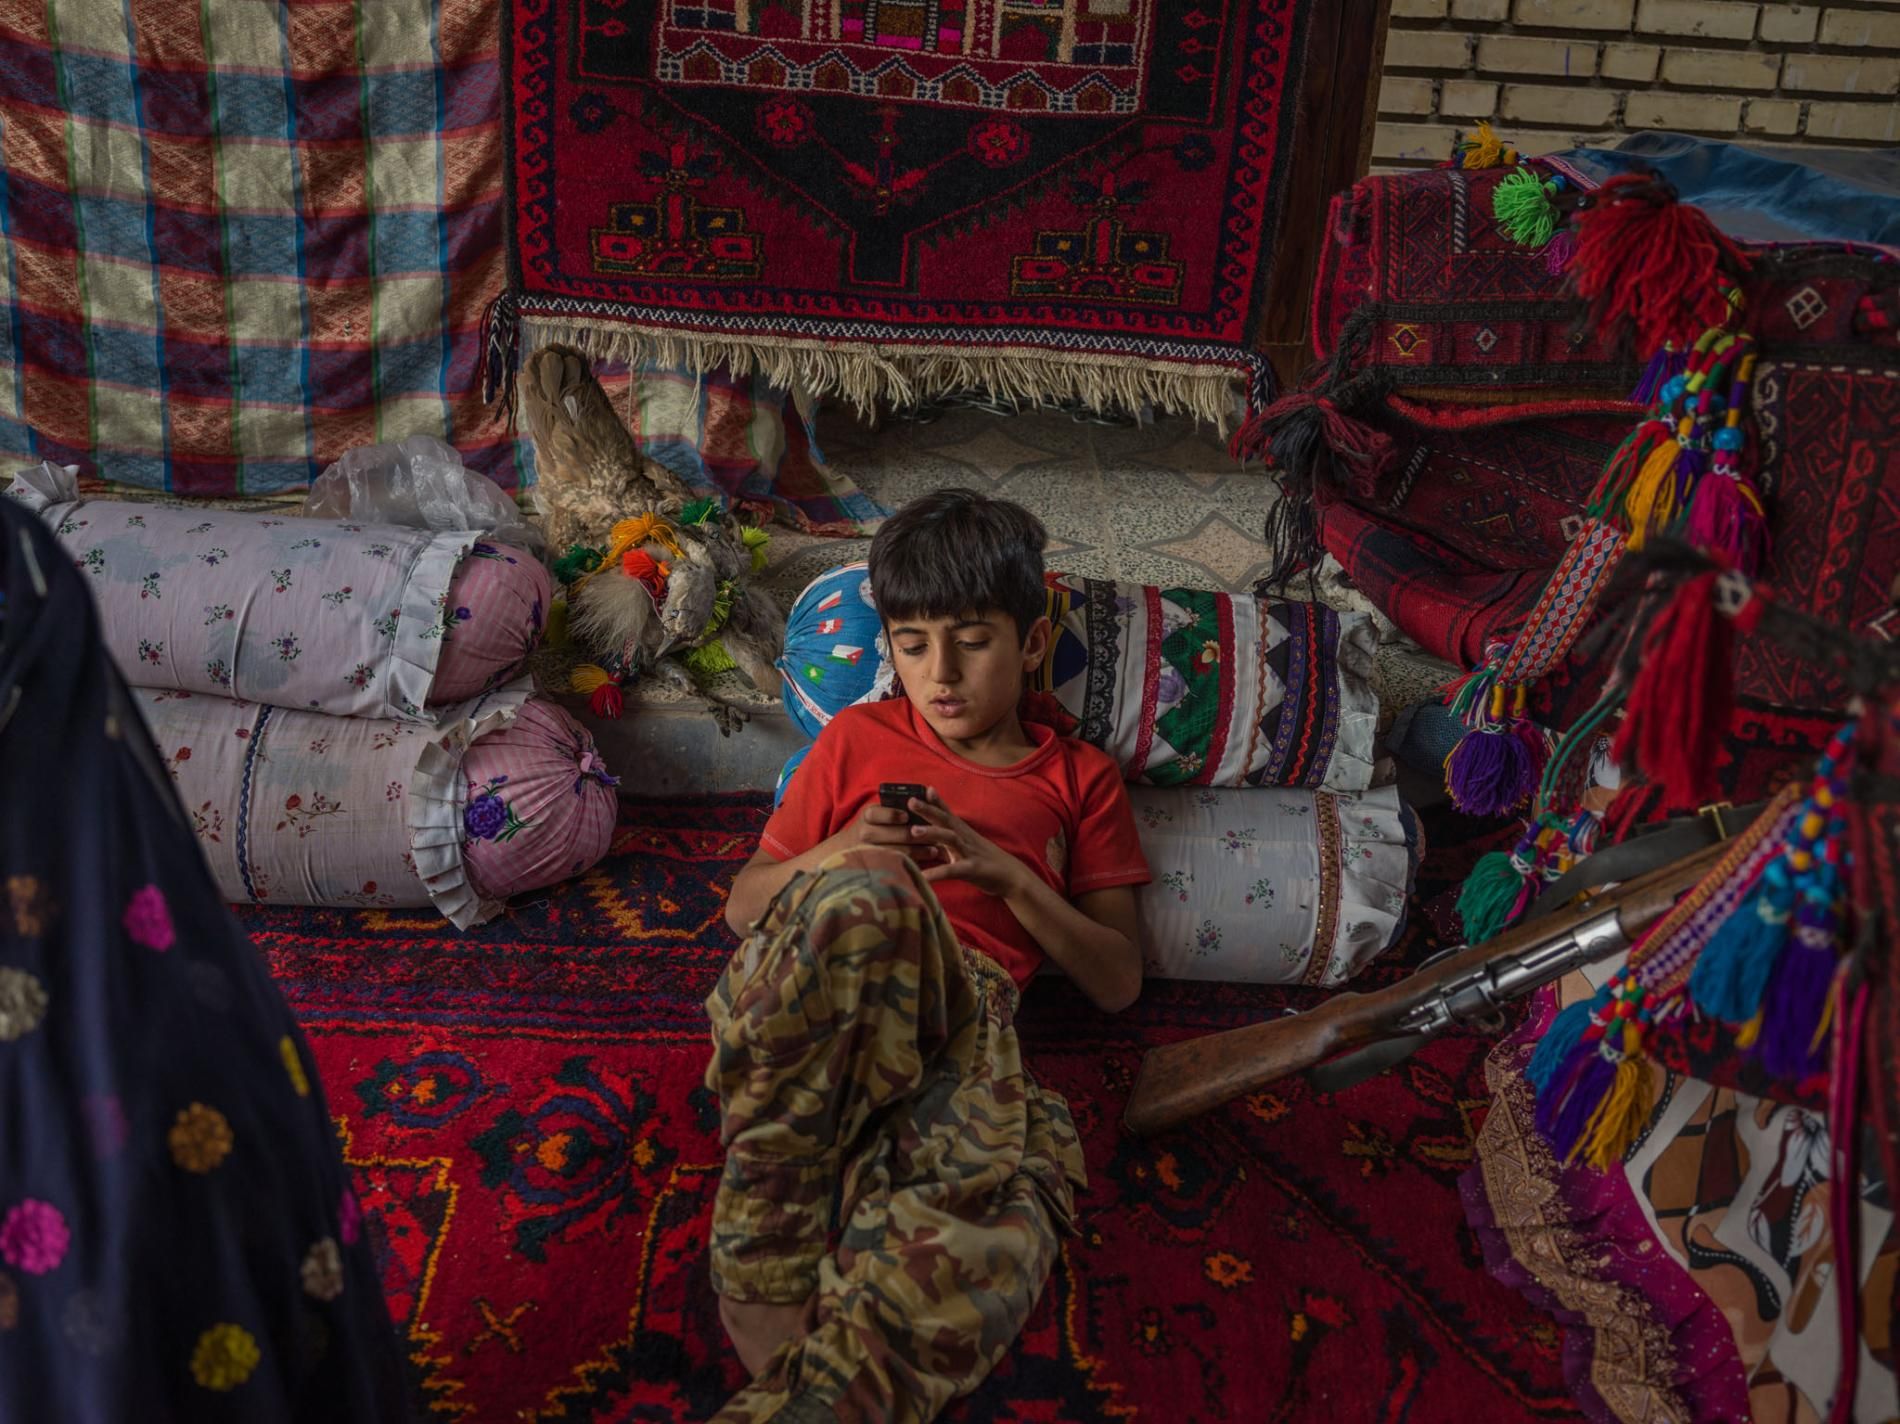 Mostafa Mokhtari, 10, sits in a tent in his grandparents’ yard. His grandparents decided to stay in a house to help their grandchildren attend school and study. But being accustomed to living in a tent, they made one for the yard. Image by Newsha Tavakolian. Iran, 2018.